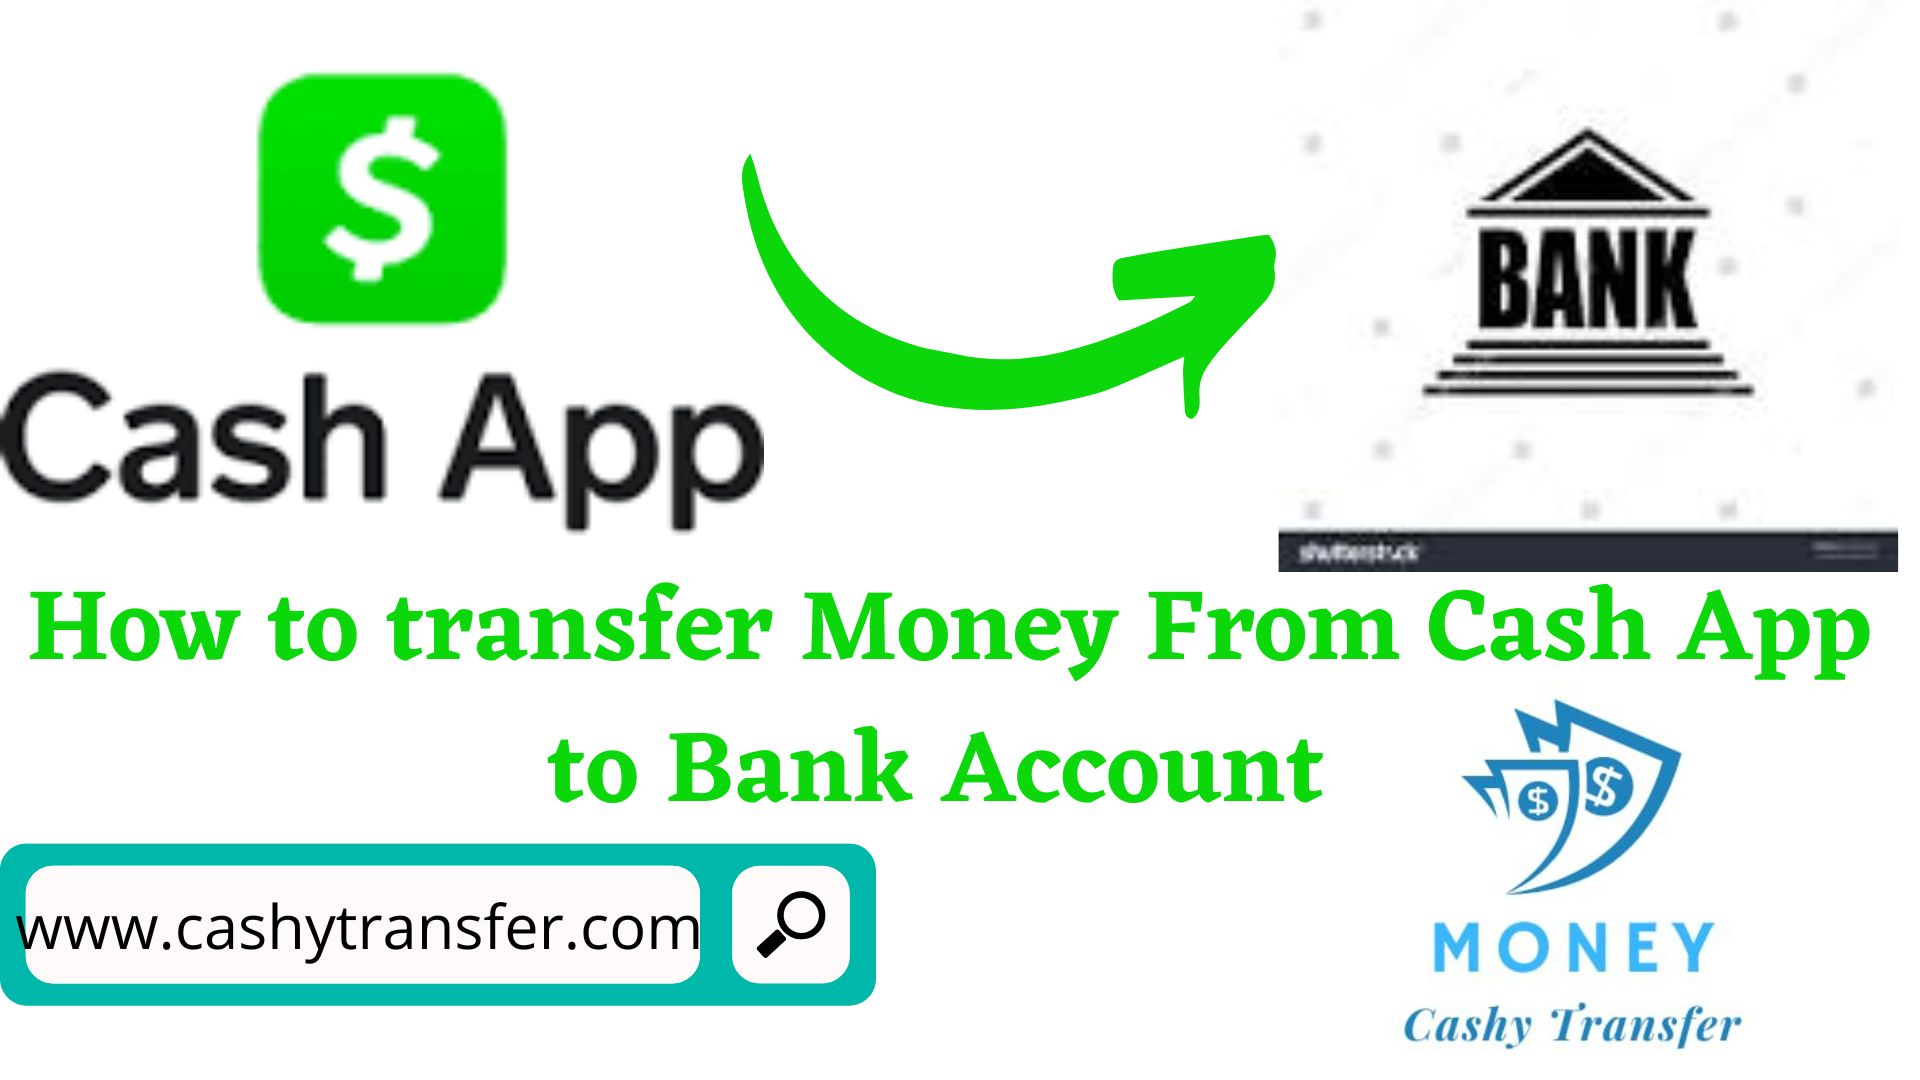 transfer Money From Cash App to Bank Account